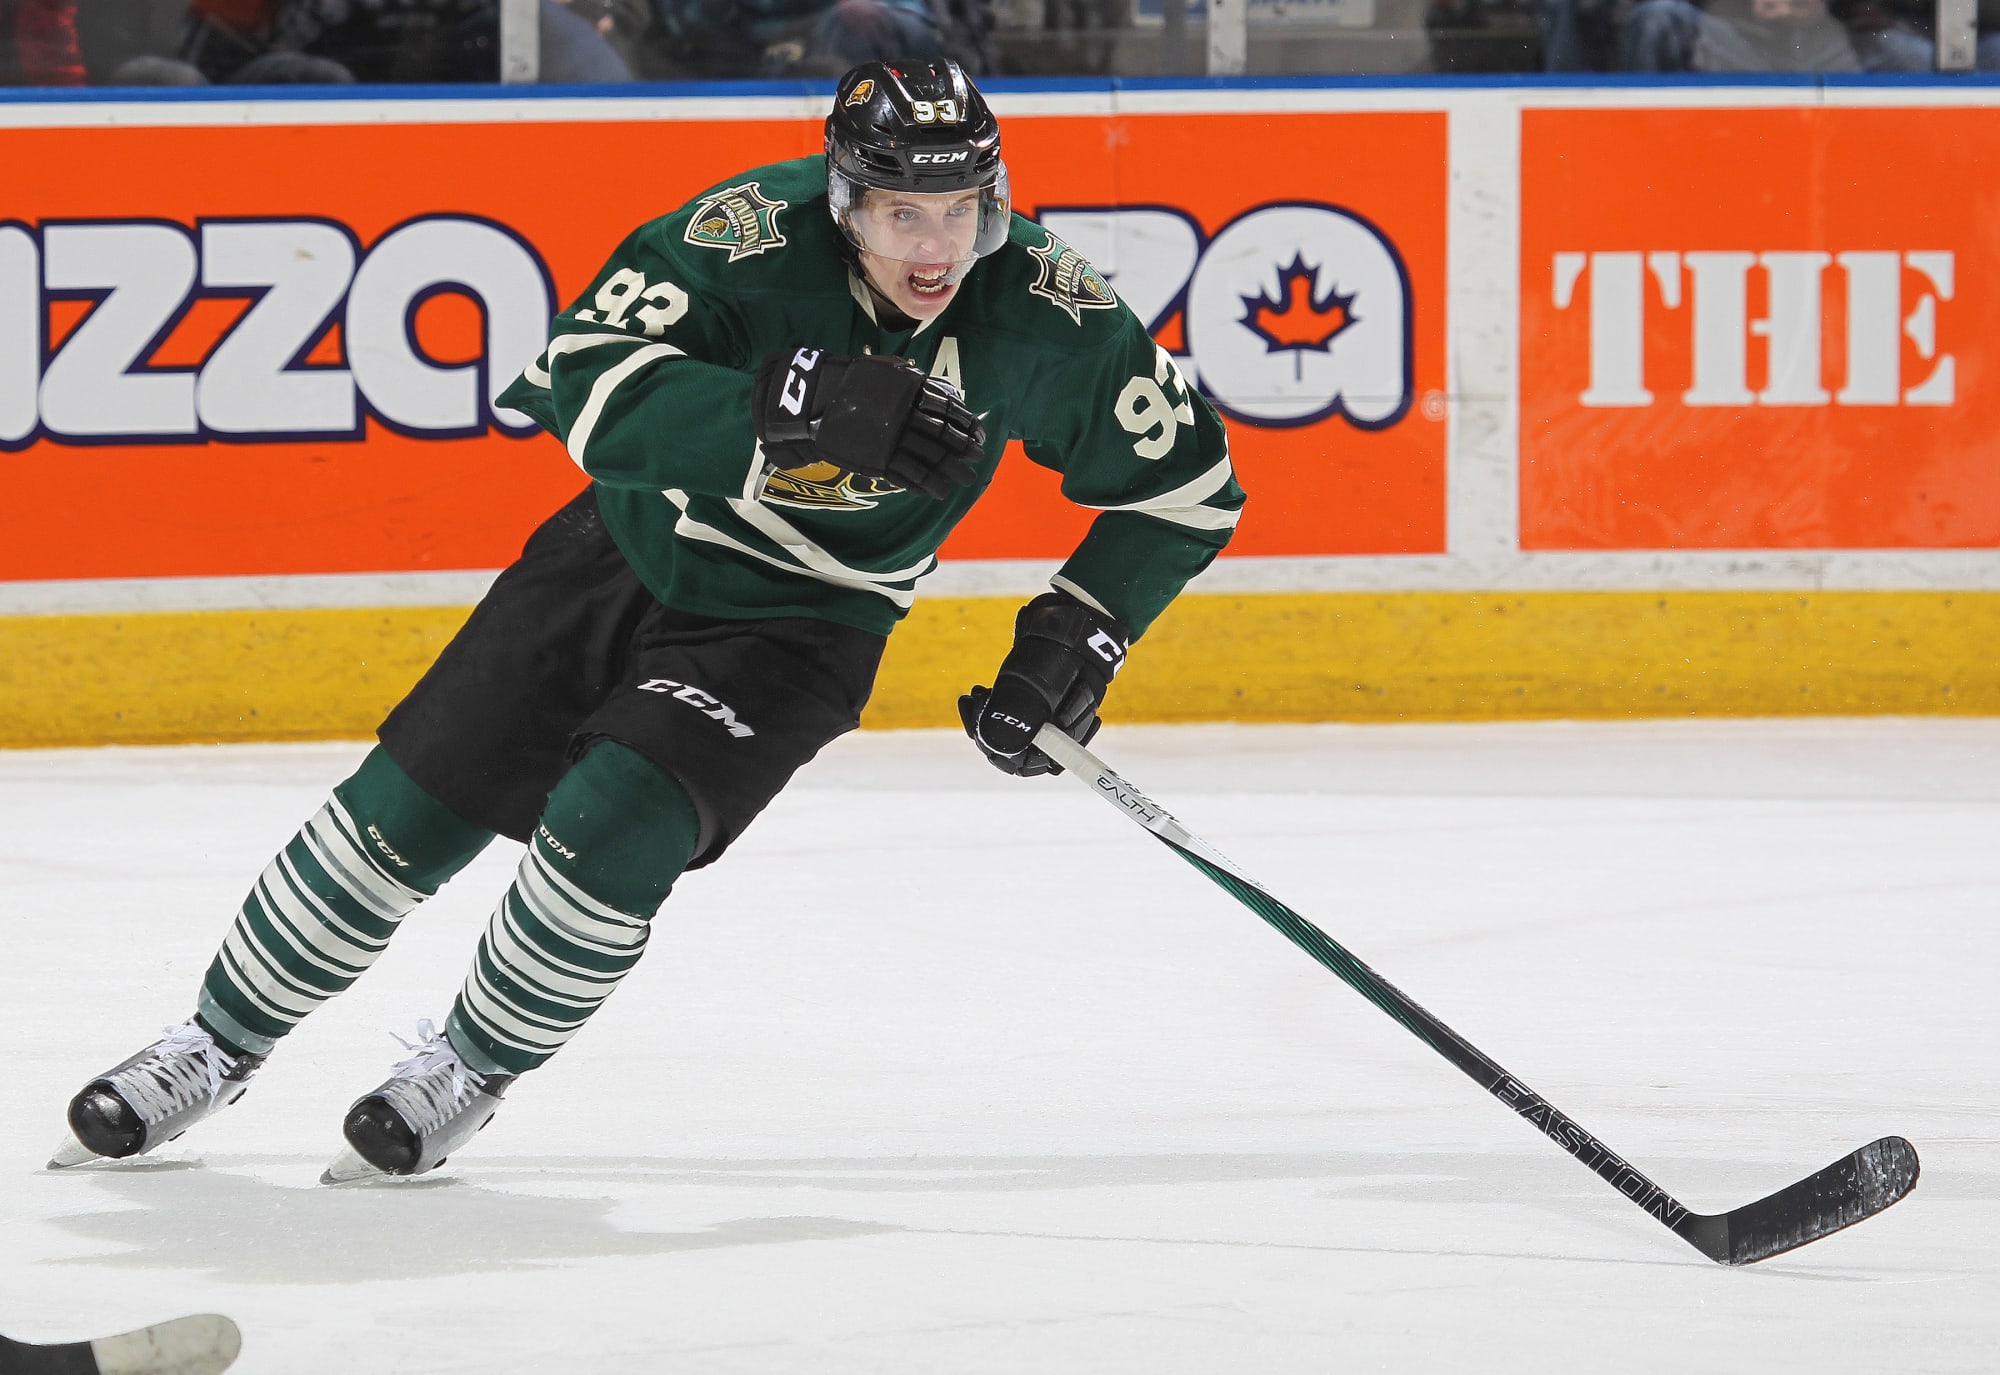 Leafs prospect Mitch Marner humiliated the Niagara Ice Dogs